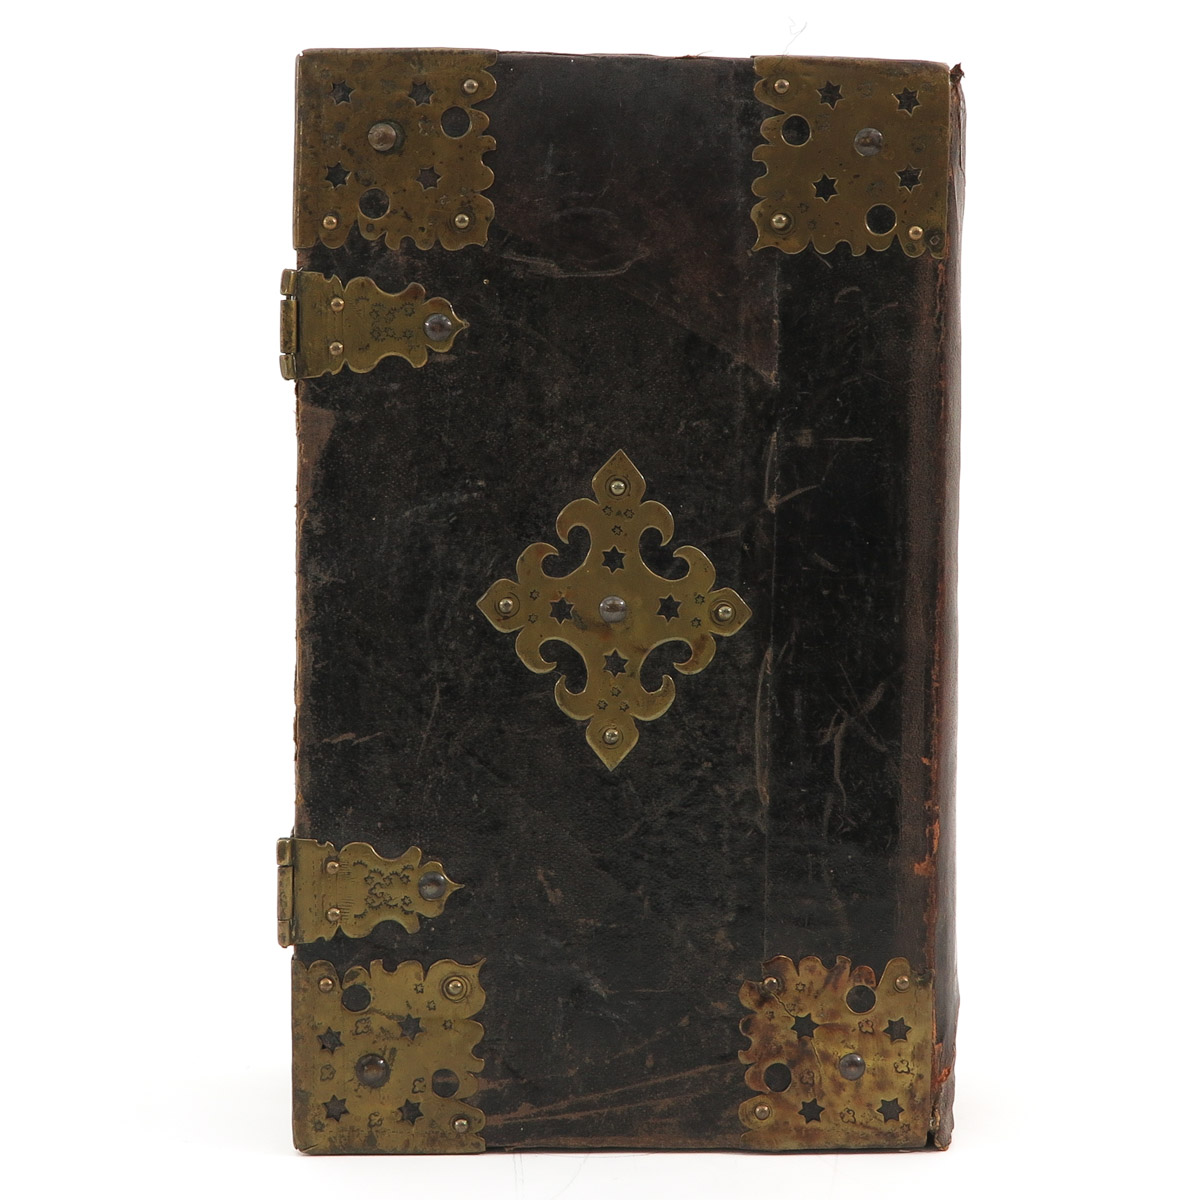 A 17th Century Dutch Bible - Image 3 of 8